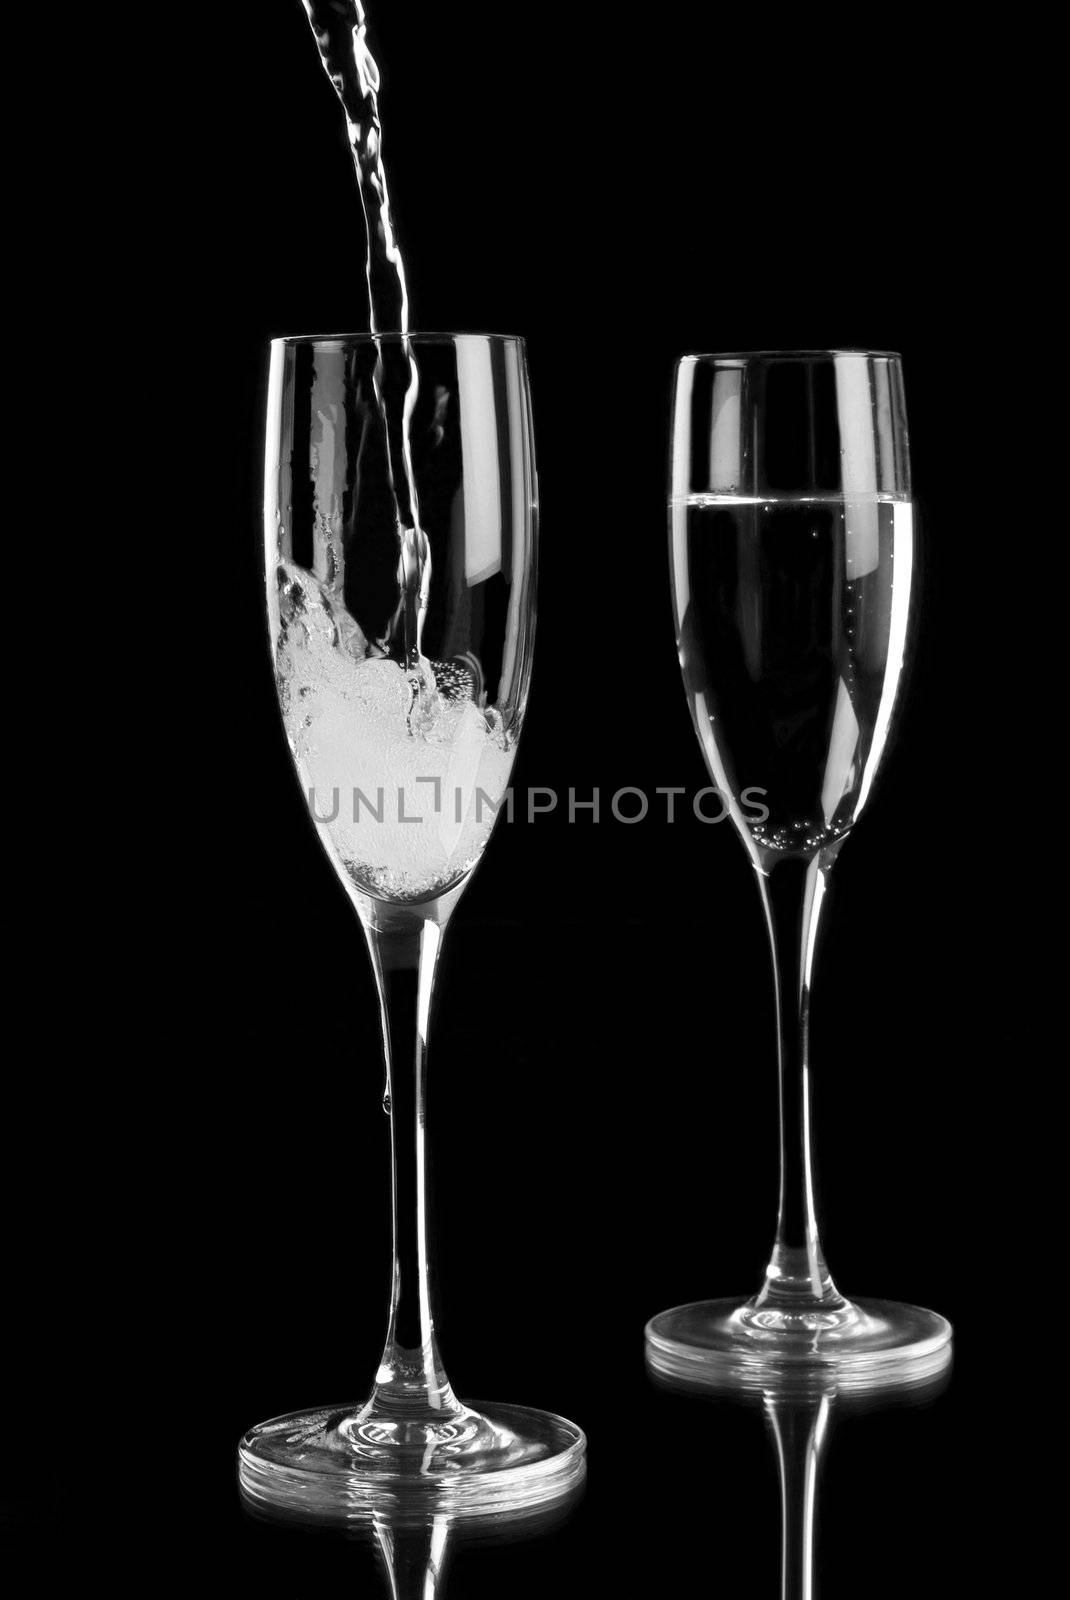 Pouring sparkling wine into champagne flutes on a black background with reflection in a mirror